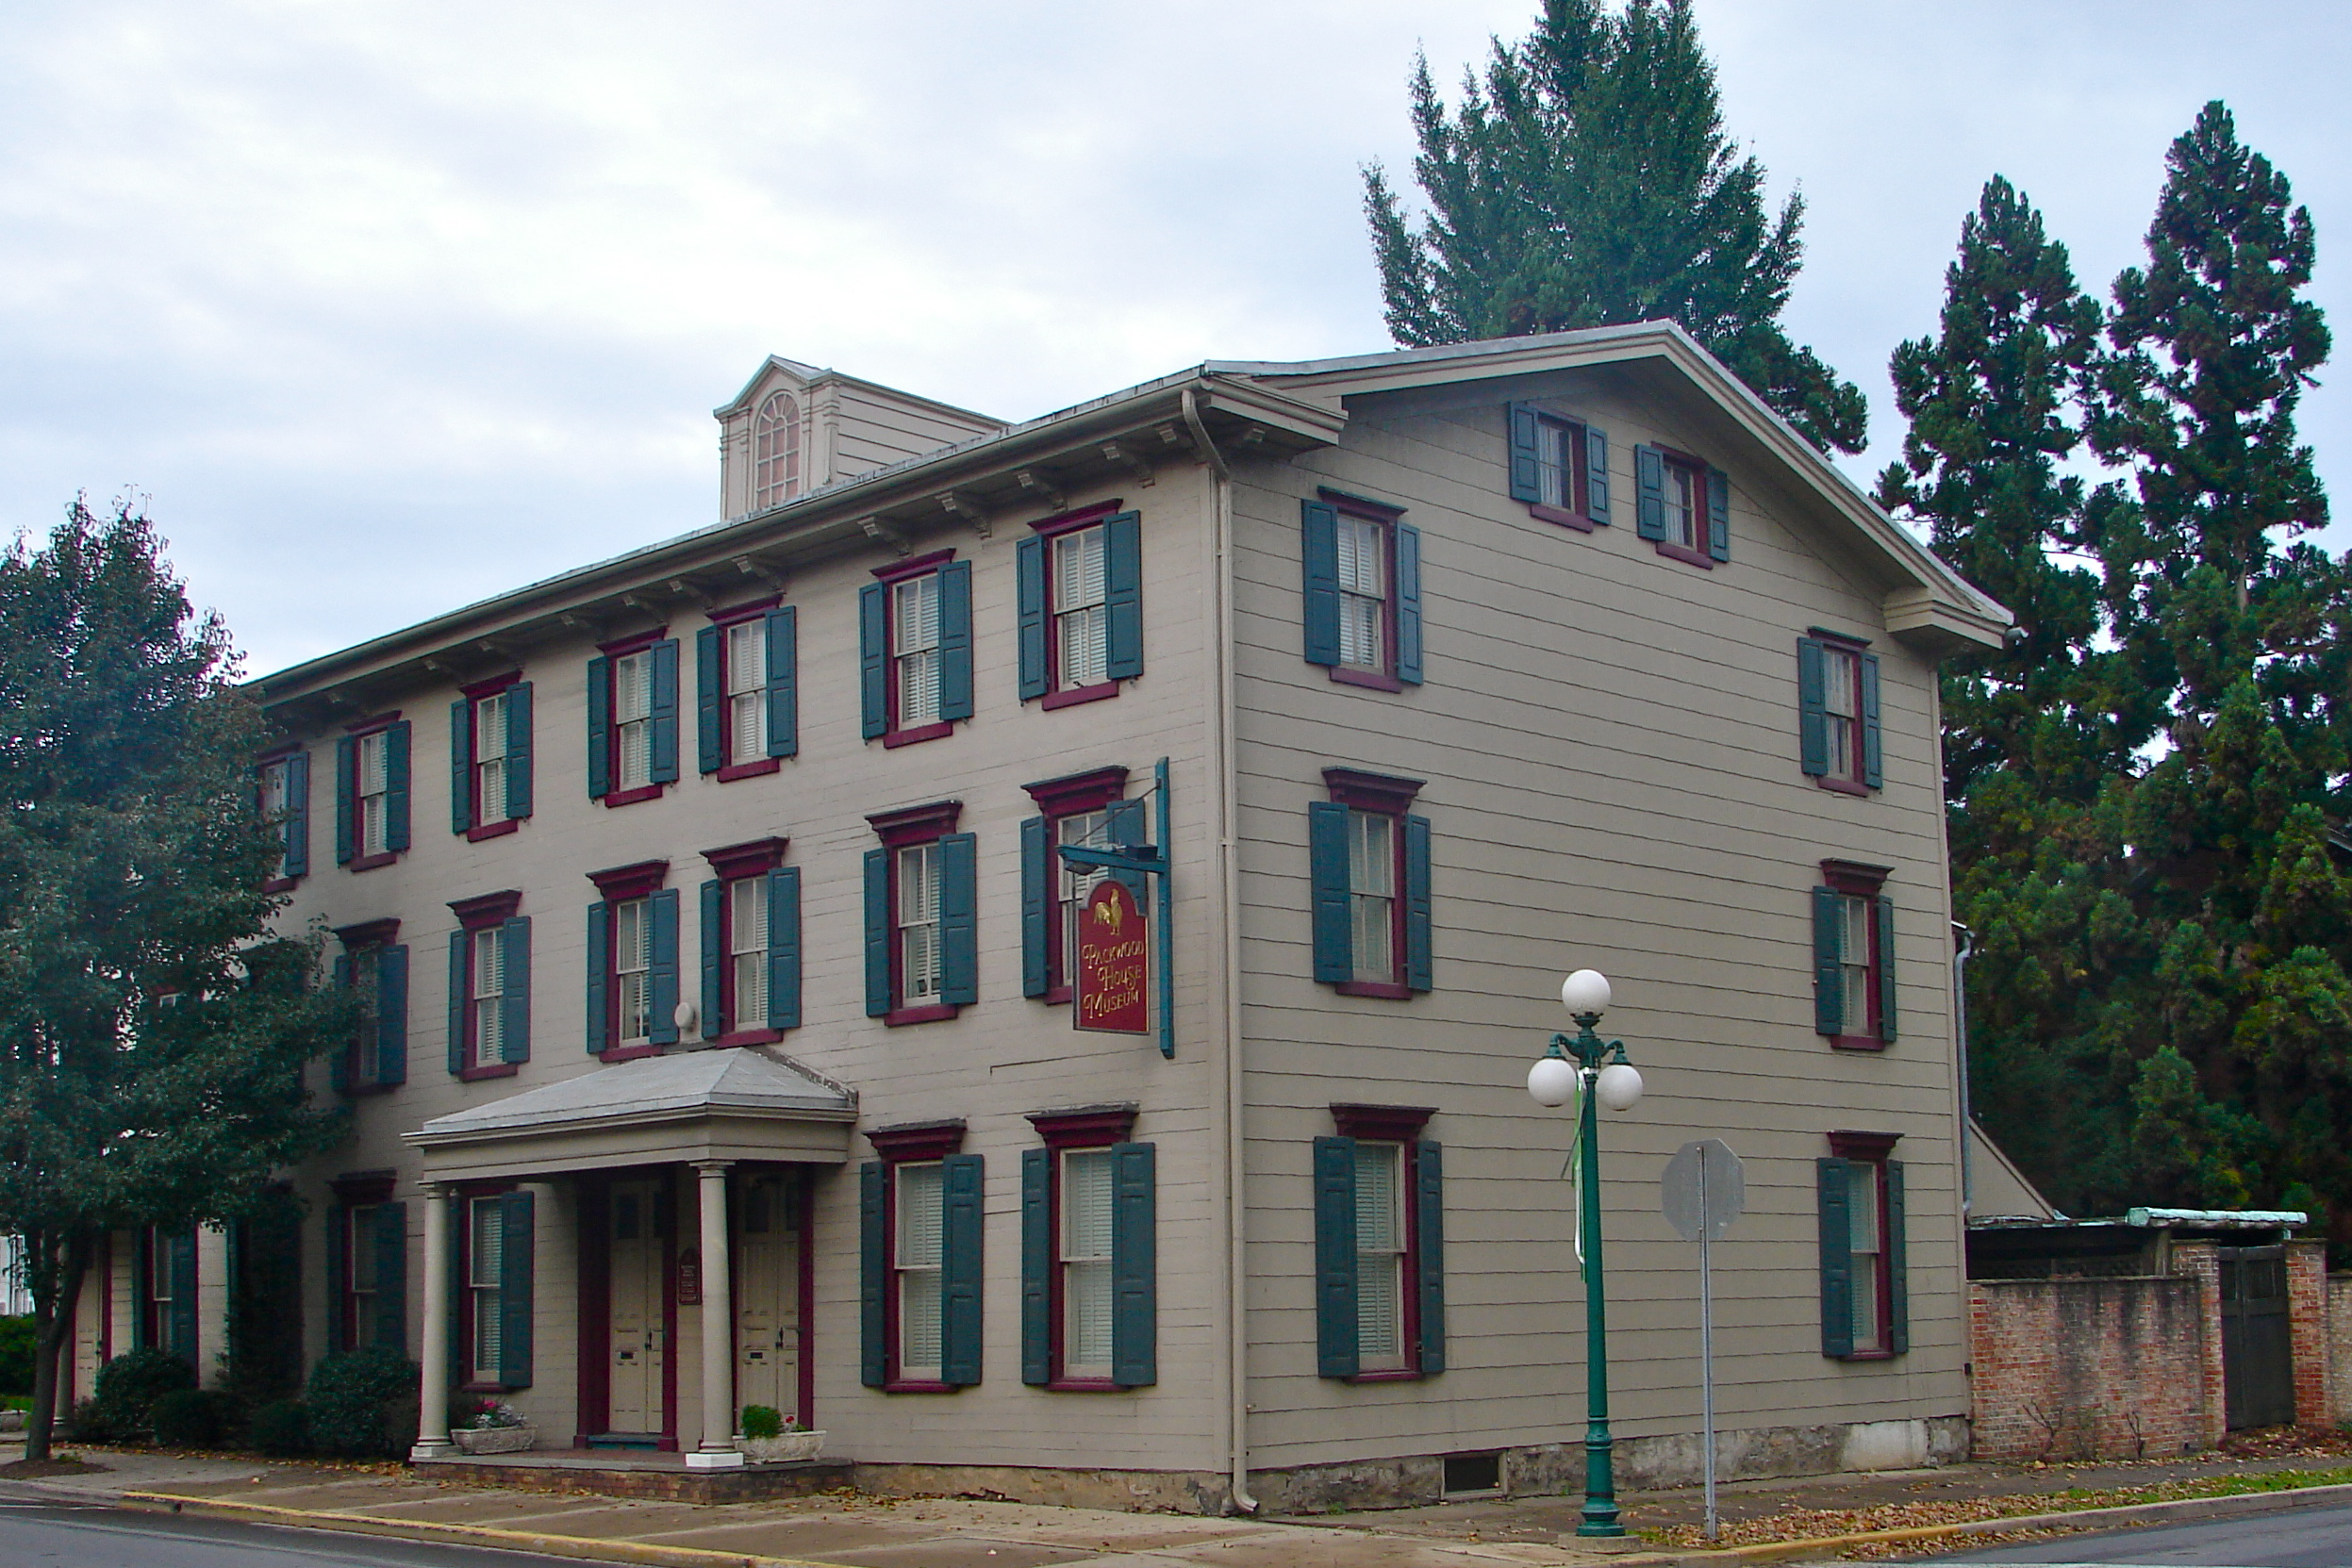 The Packwood House Museum sits at the corner of Market and Water Streets in Lewisburg, Pennsylvania. 